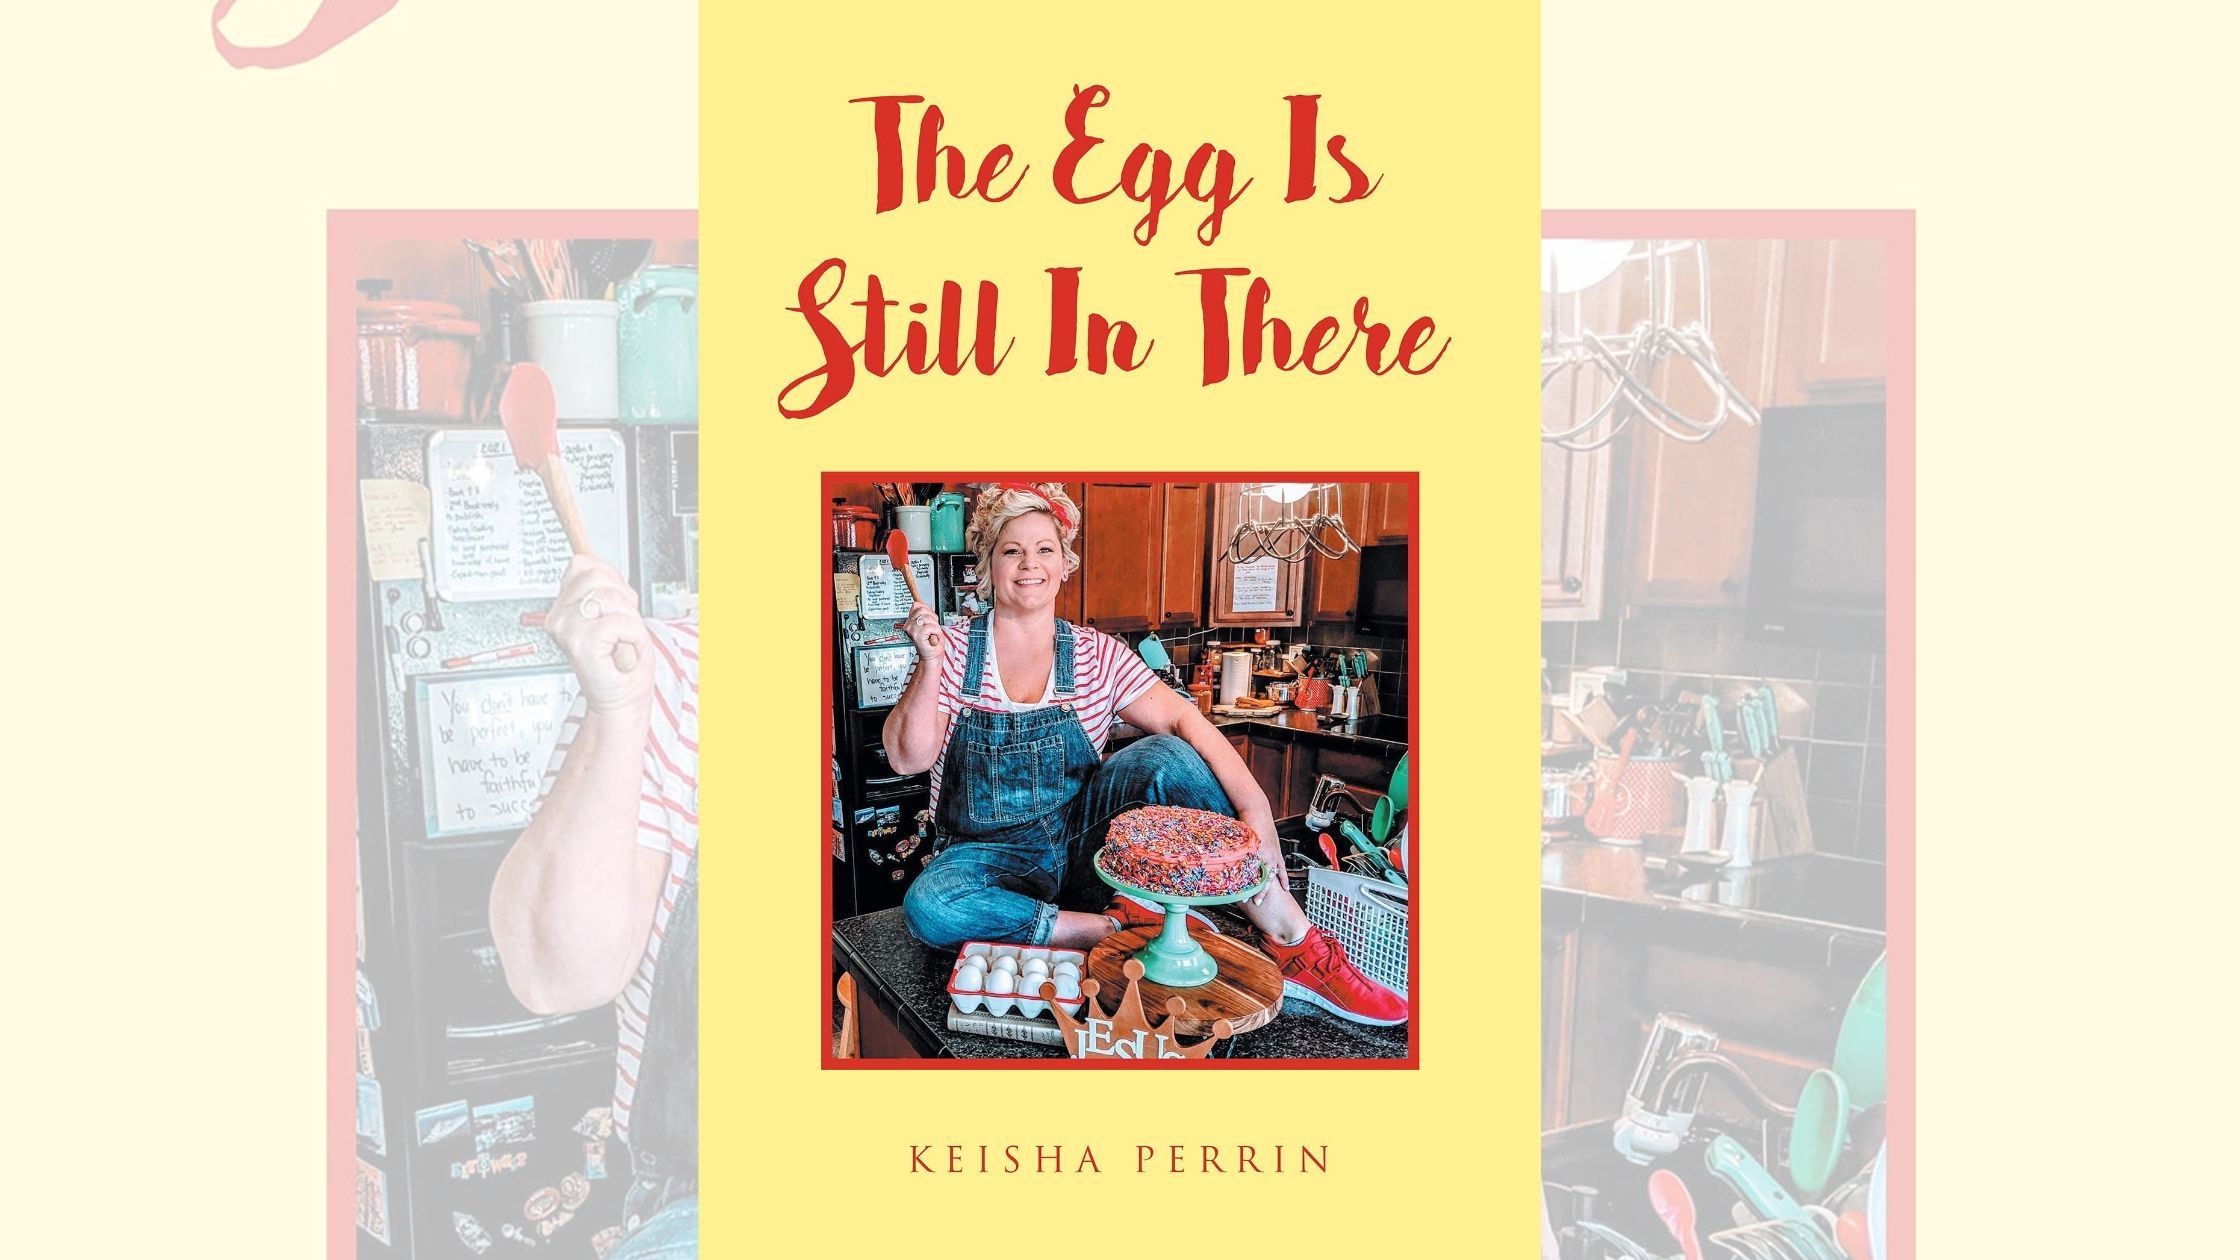 Keisha Perrin’s newly released “The Egg Is Still in There” is a powerful story of finding one’s faith and discovering purpose through Christ